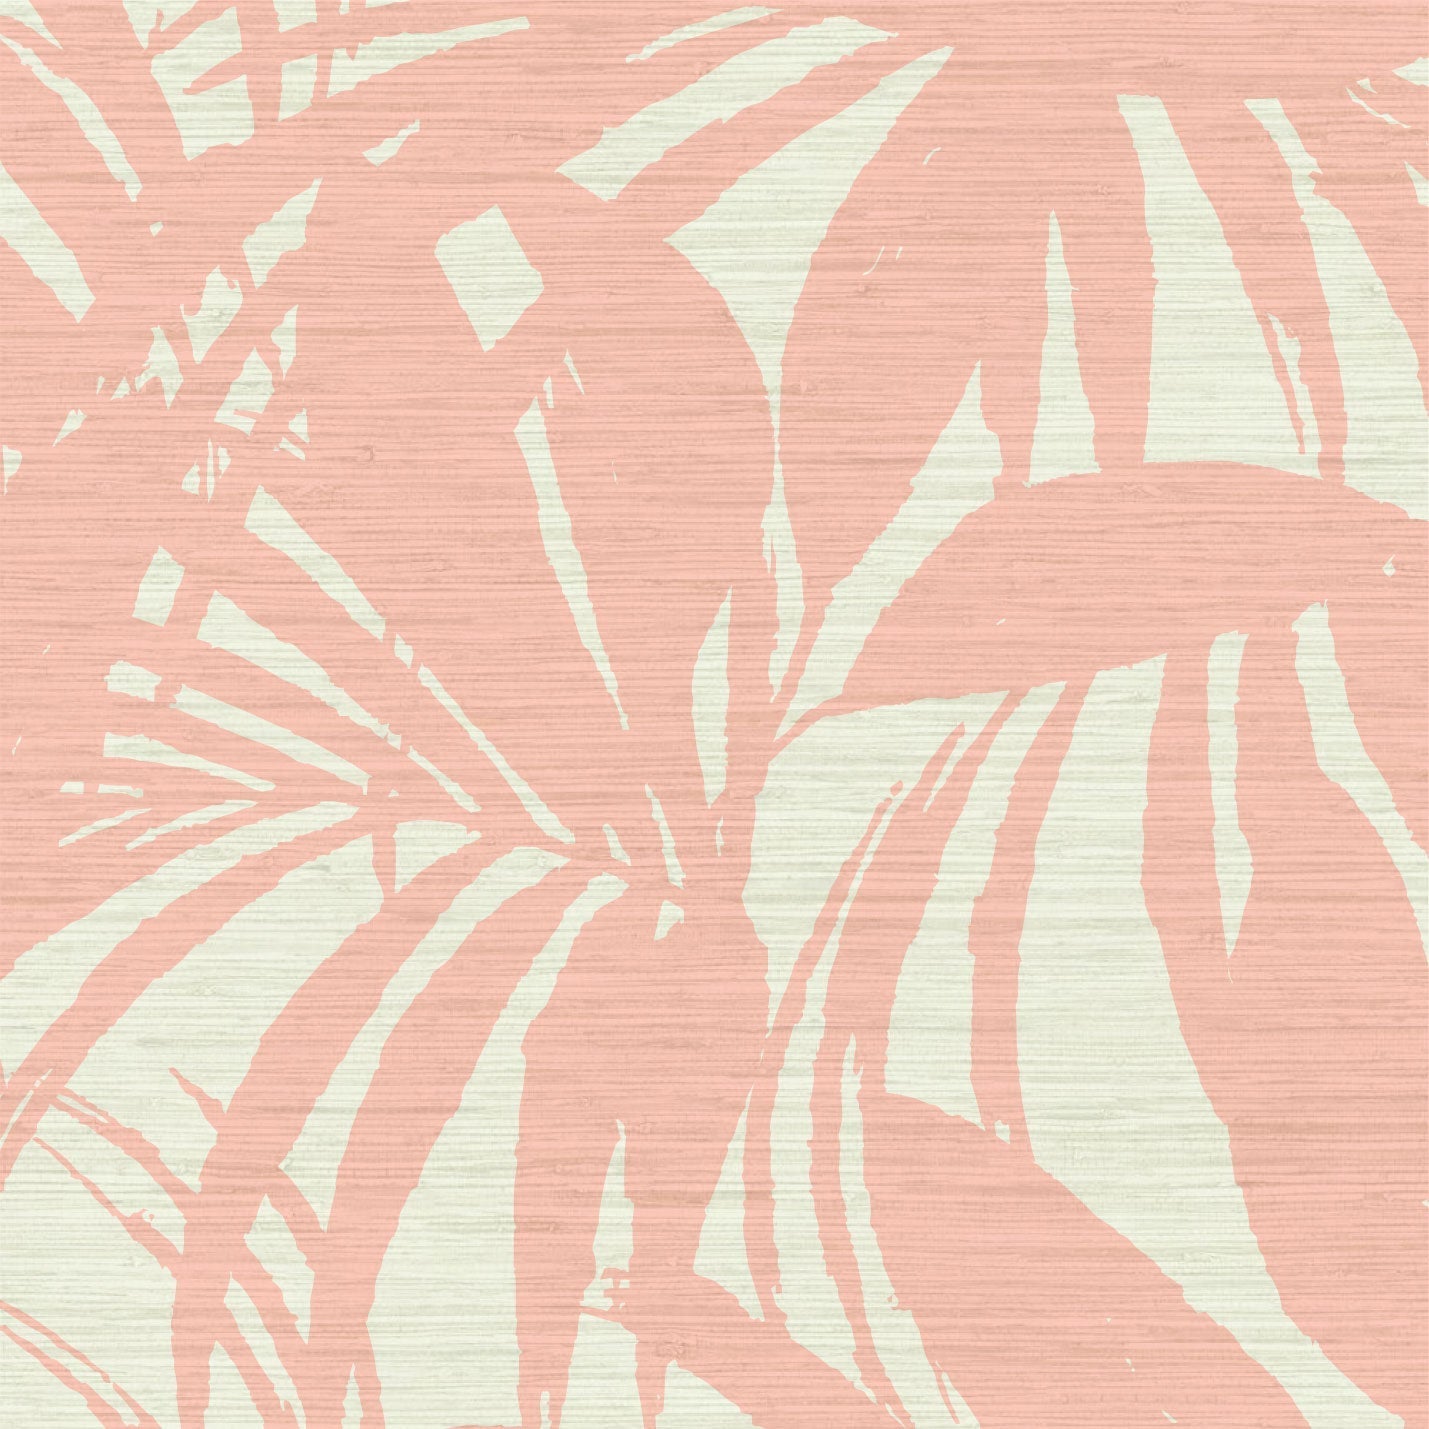 printed grasscloth wallpaper oversize tropical leaf Natural Textured Eco-Friendly Non-toxic High-quality  Sustainable practices Sustainability Interior Design Wall covering Bold retro chic custom jungle garden botanical Seaside Coastal Seashore Waterfront Vacation home styling Retreat Relaxed beach vibes Beach cottage Shoreline Oceanfront white coral peach pink